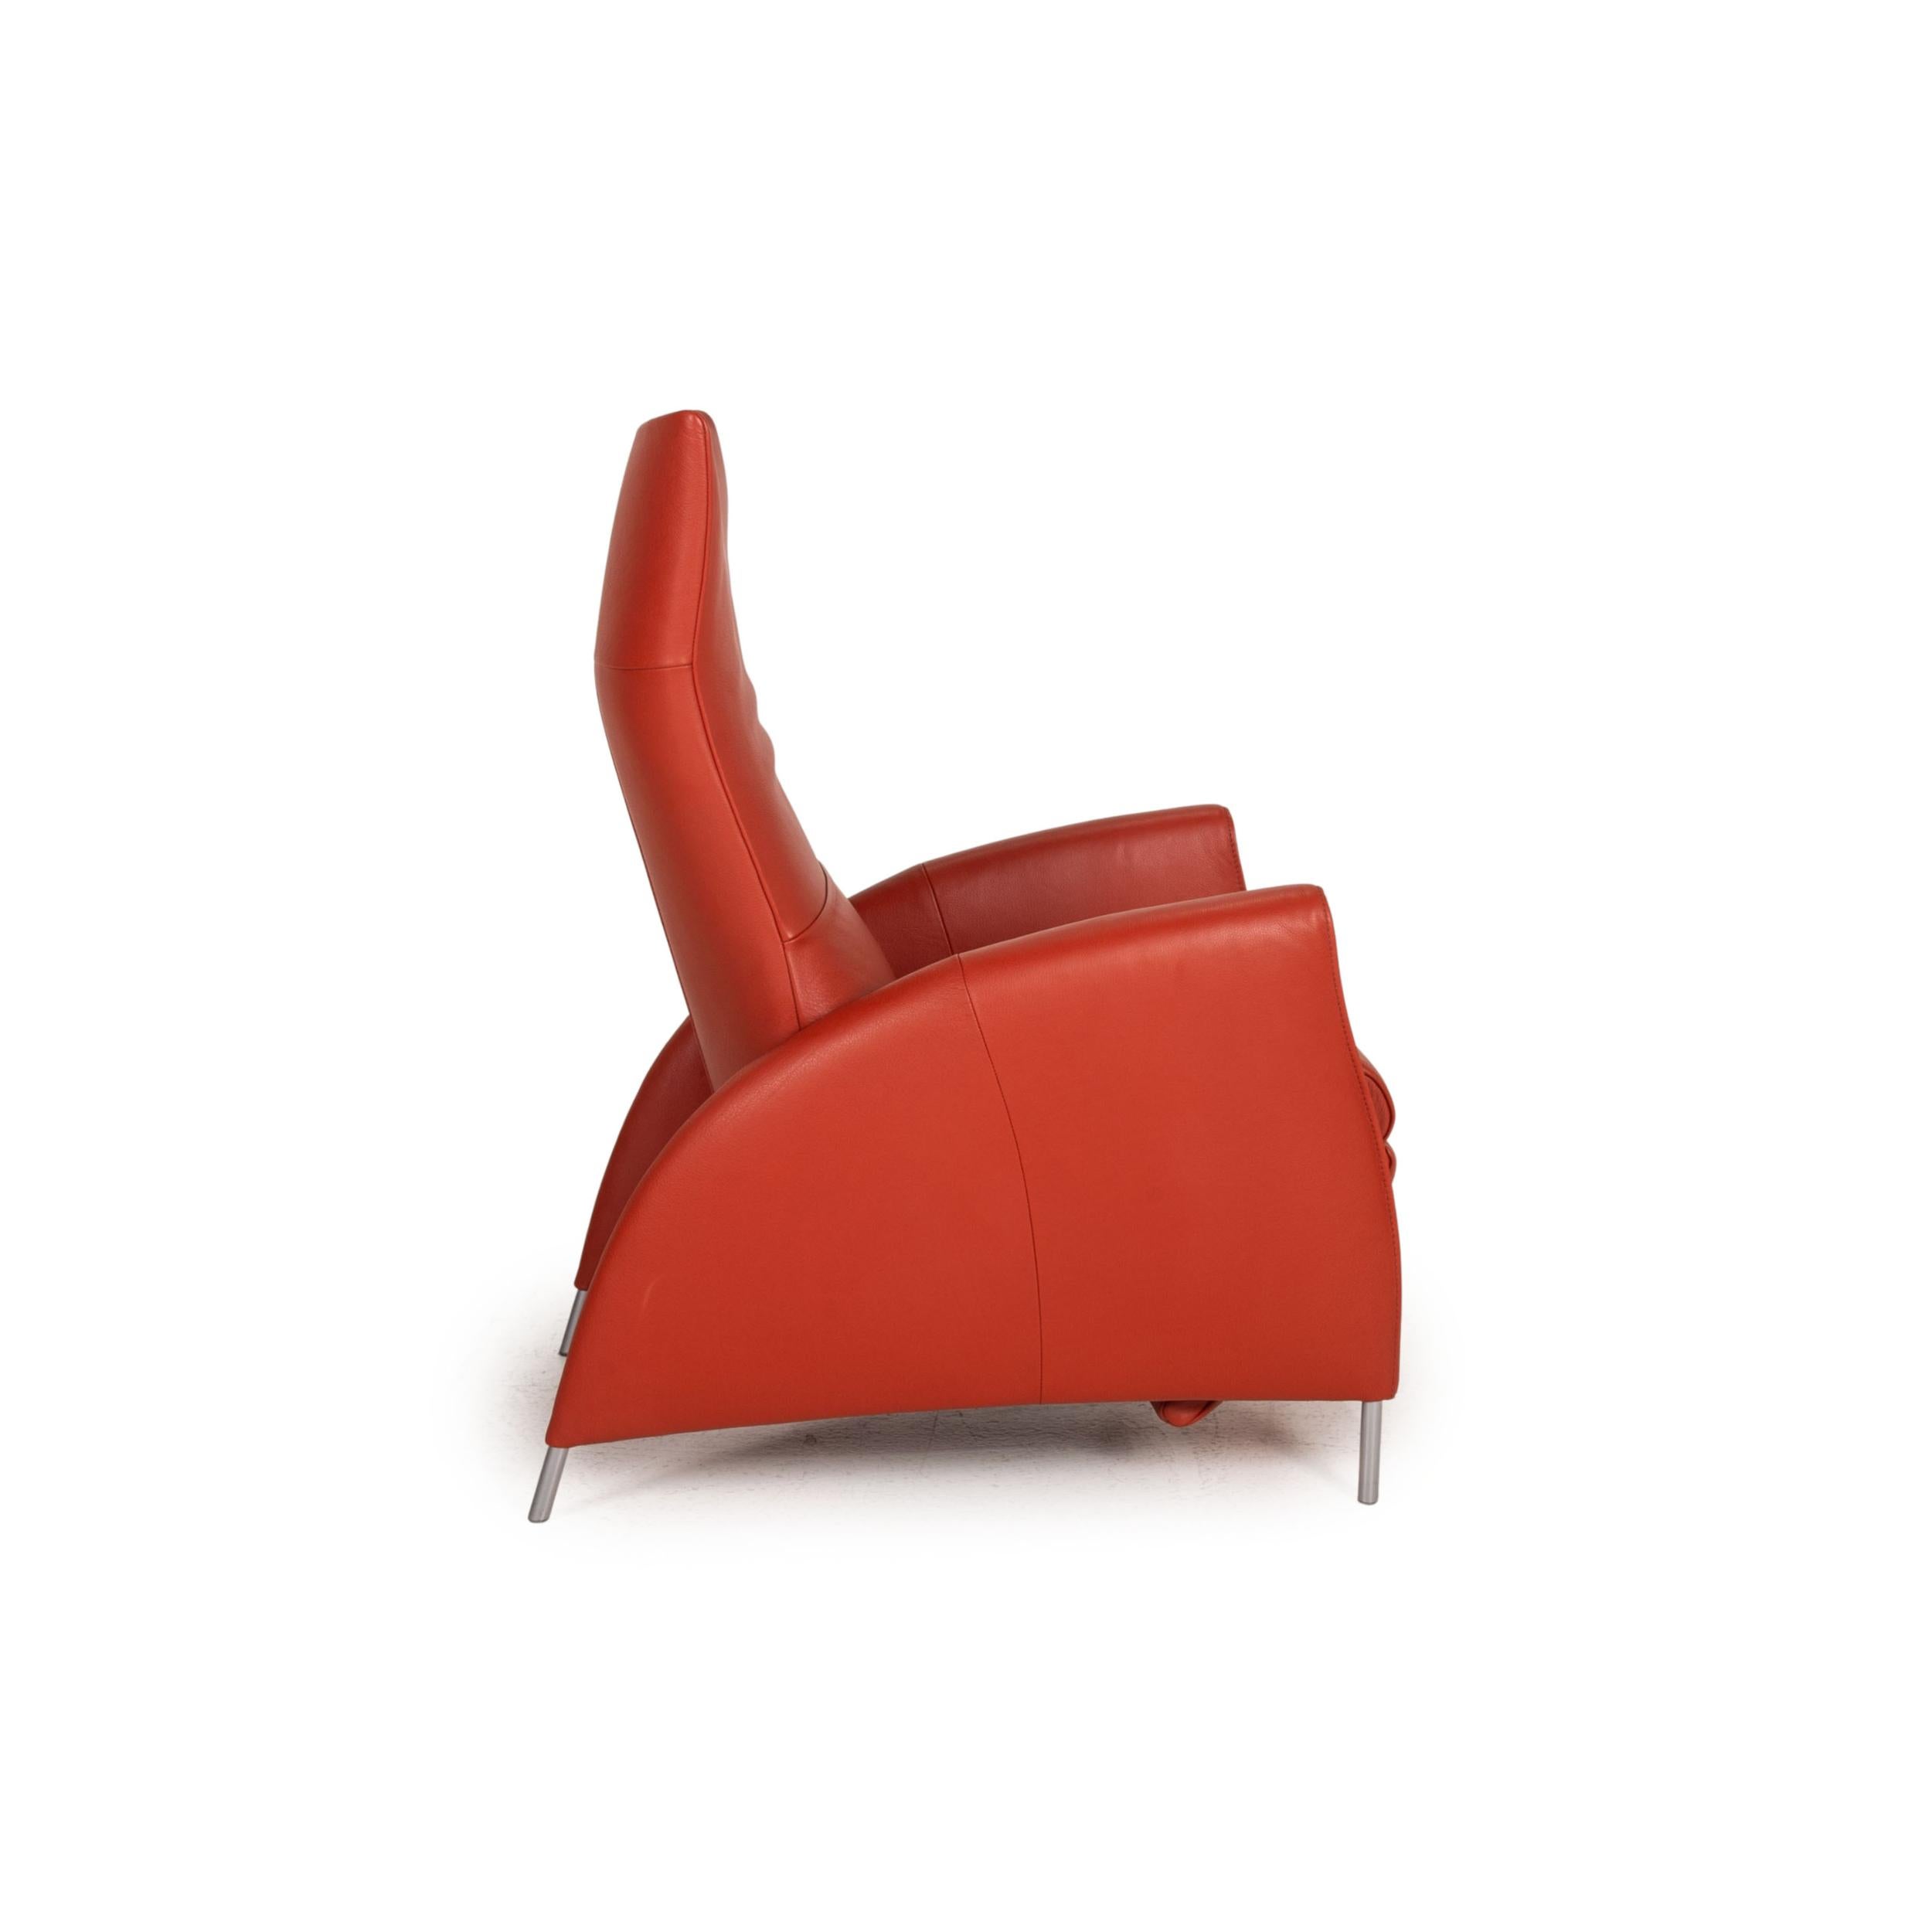 Contemporary Jori JR 3490 Leather Armchair Red Relaxation Armchair Function